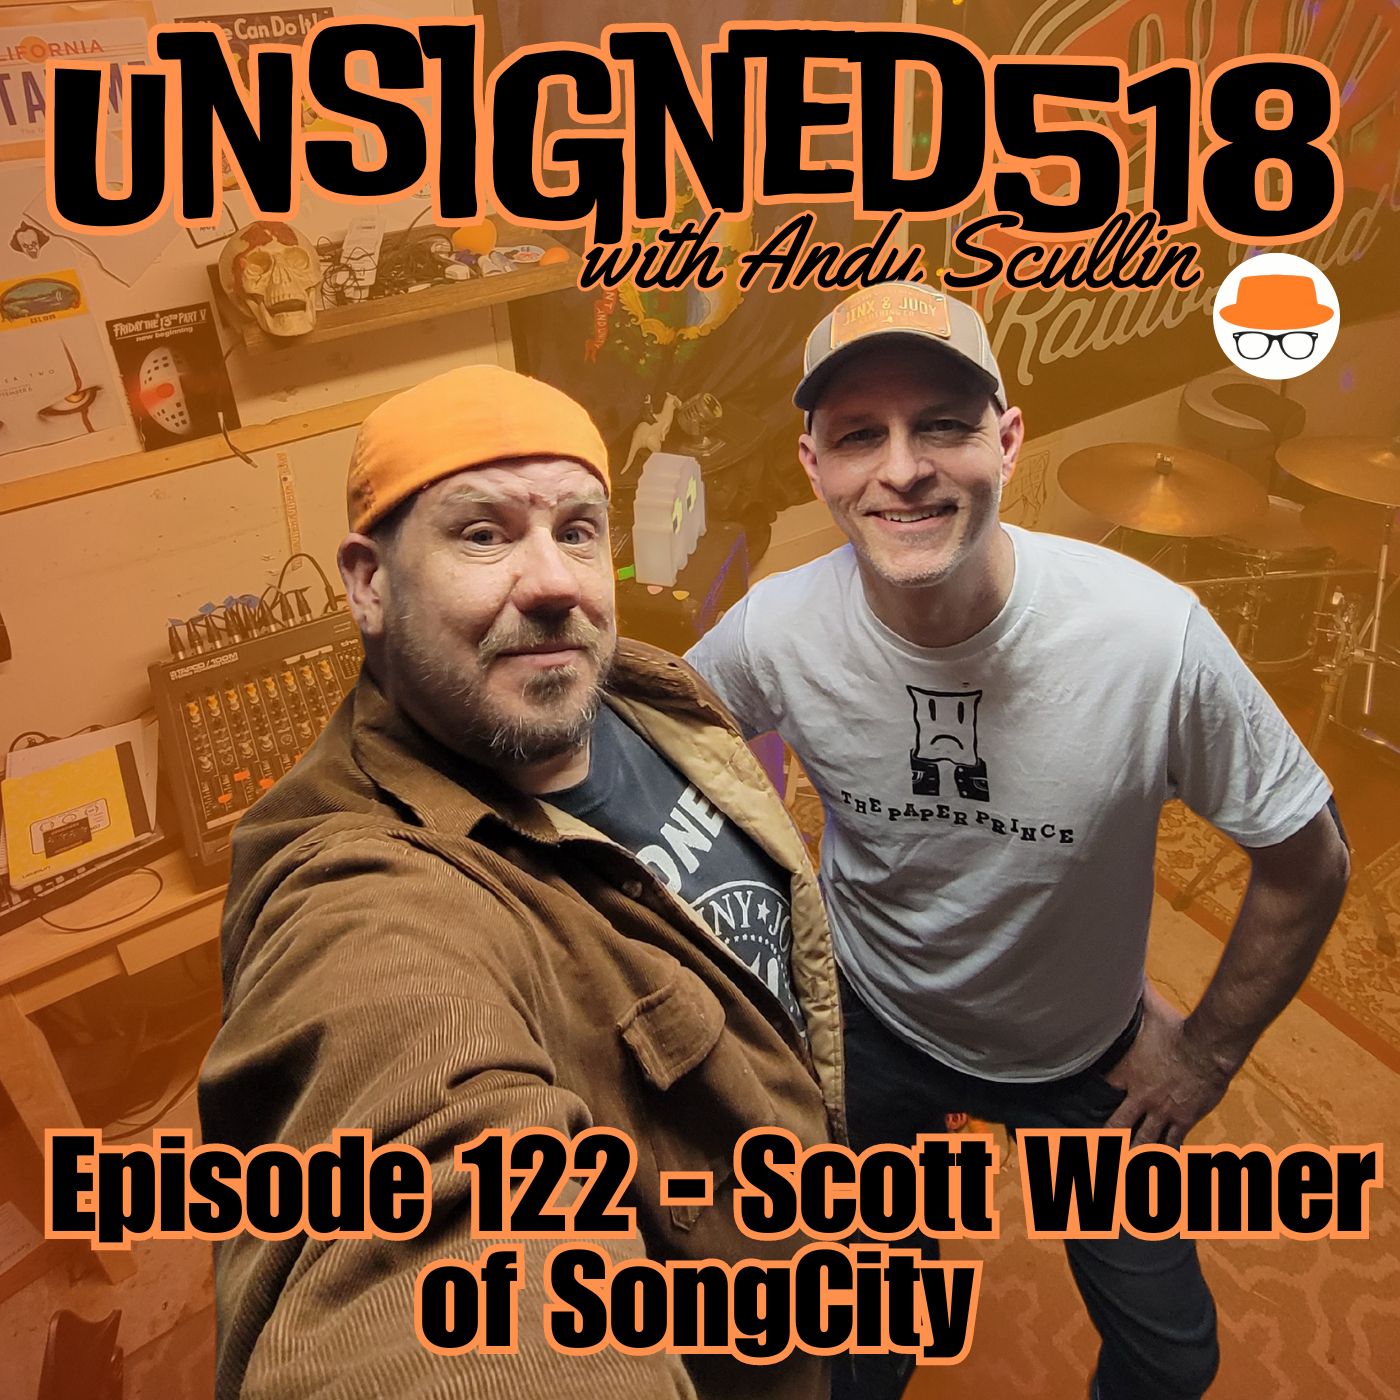 Unsigned518 - Episode 122 - Scott Womer of SongCity